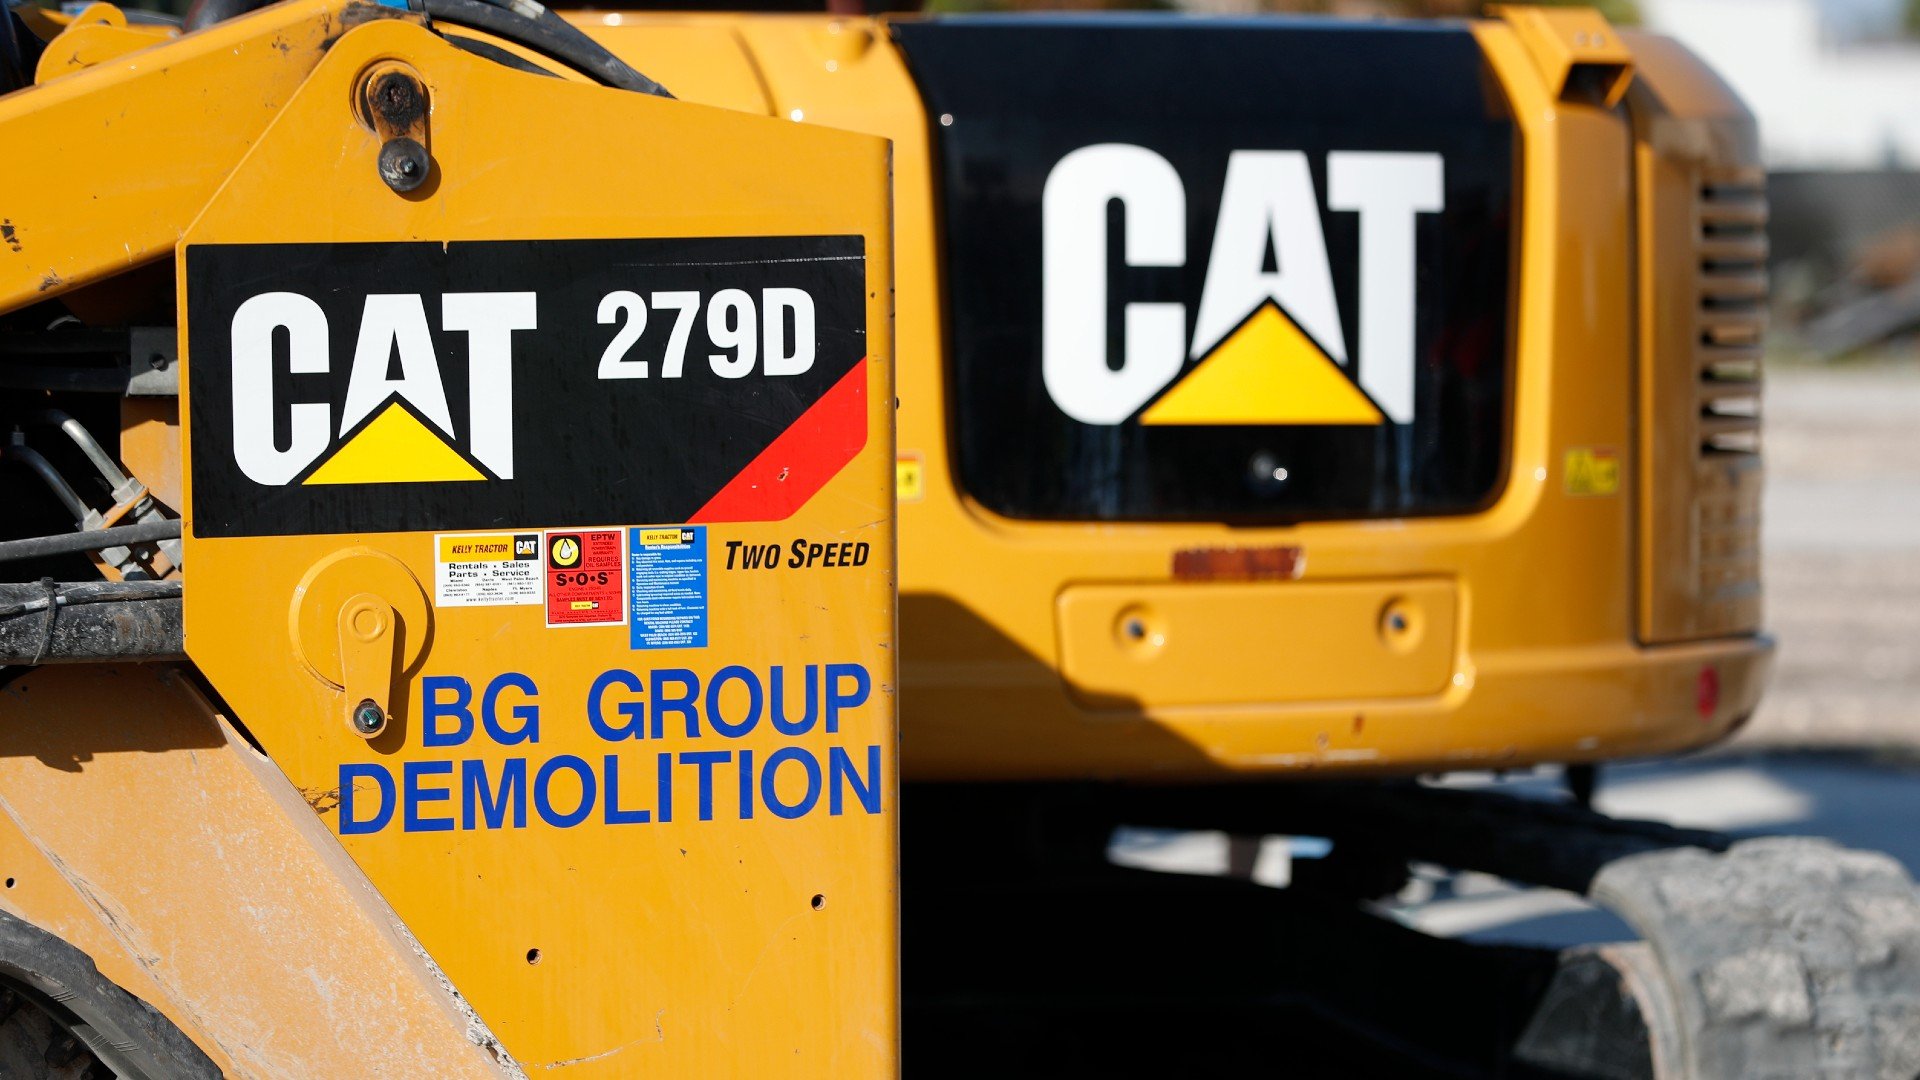 Caterpillar Moving Its Headquarters to Texas from Illinois